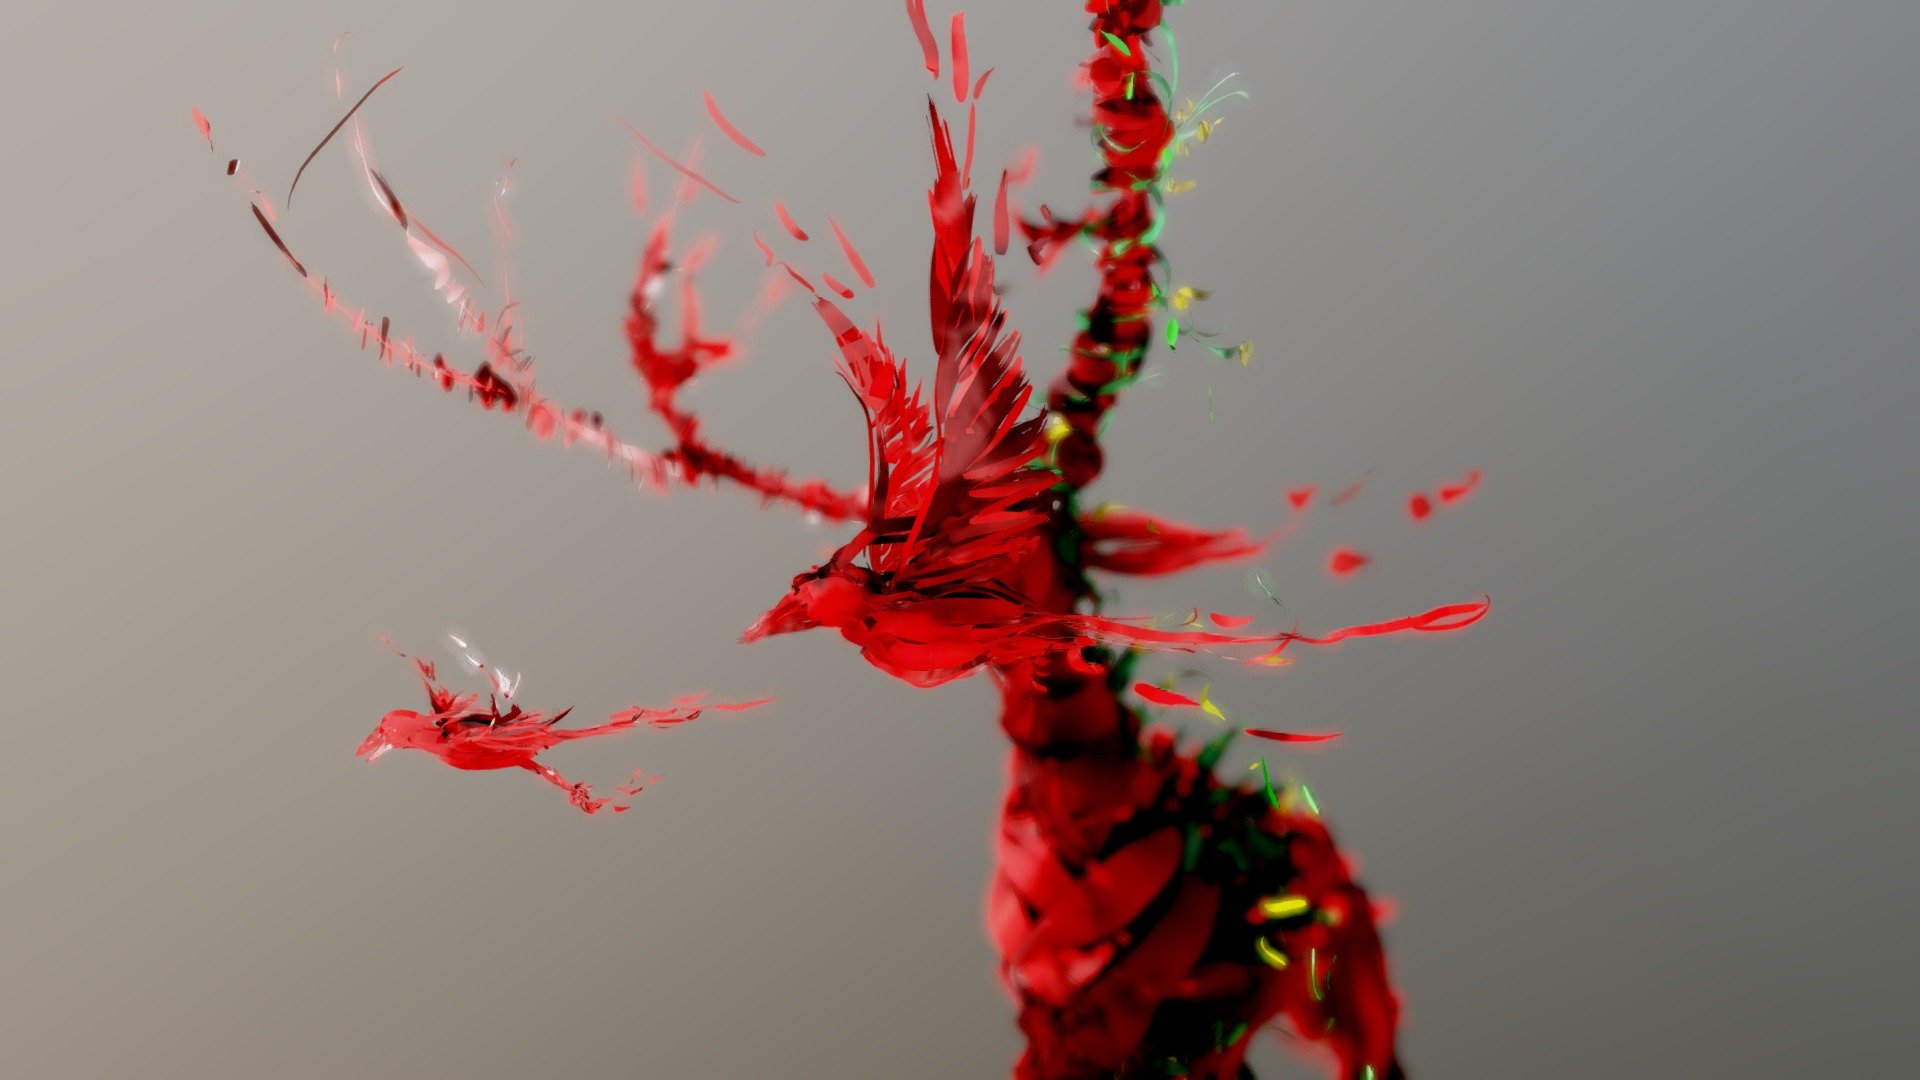 Made this in Tiltbrush and a WMR setup, a while back but could never get it to export with tiltbrush's brushes propperly.. until now(tiltbrush added sketchfab support).



heres the old upload(tweaked in blender) - https://sketchfab.com/3d-models/stag-and-friends-a6b3fe73aaf1443b80b504ce5adfbc34 - Stag And Friends original - Download Free 3D model by Chaitanya Krishnan (@chaitanyak) 3d model